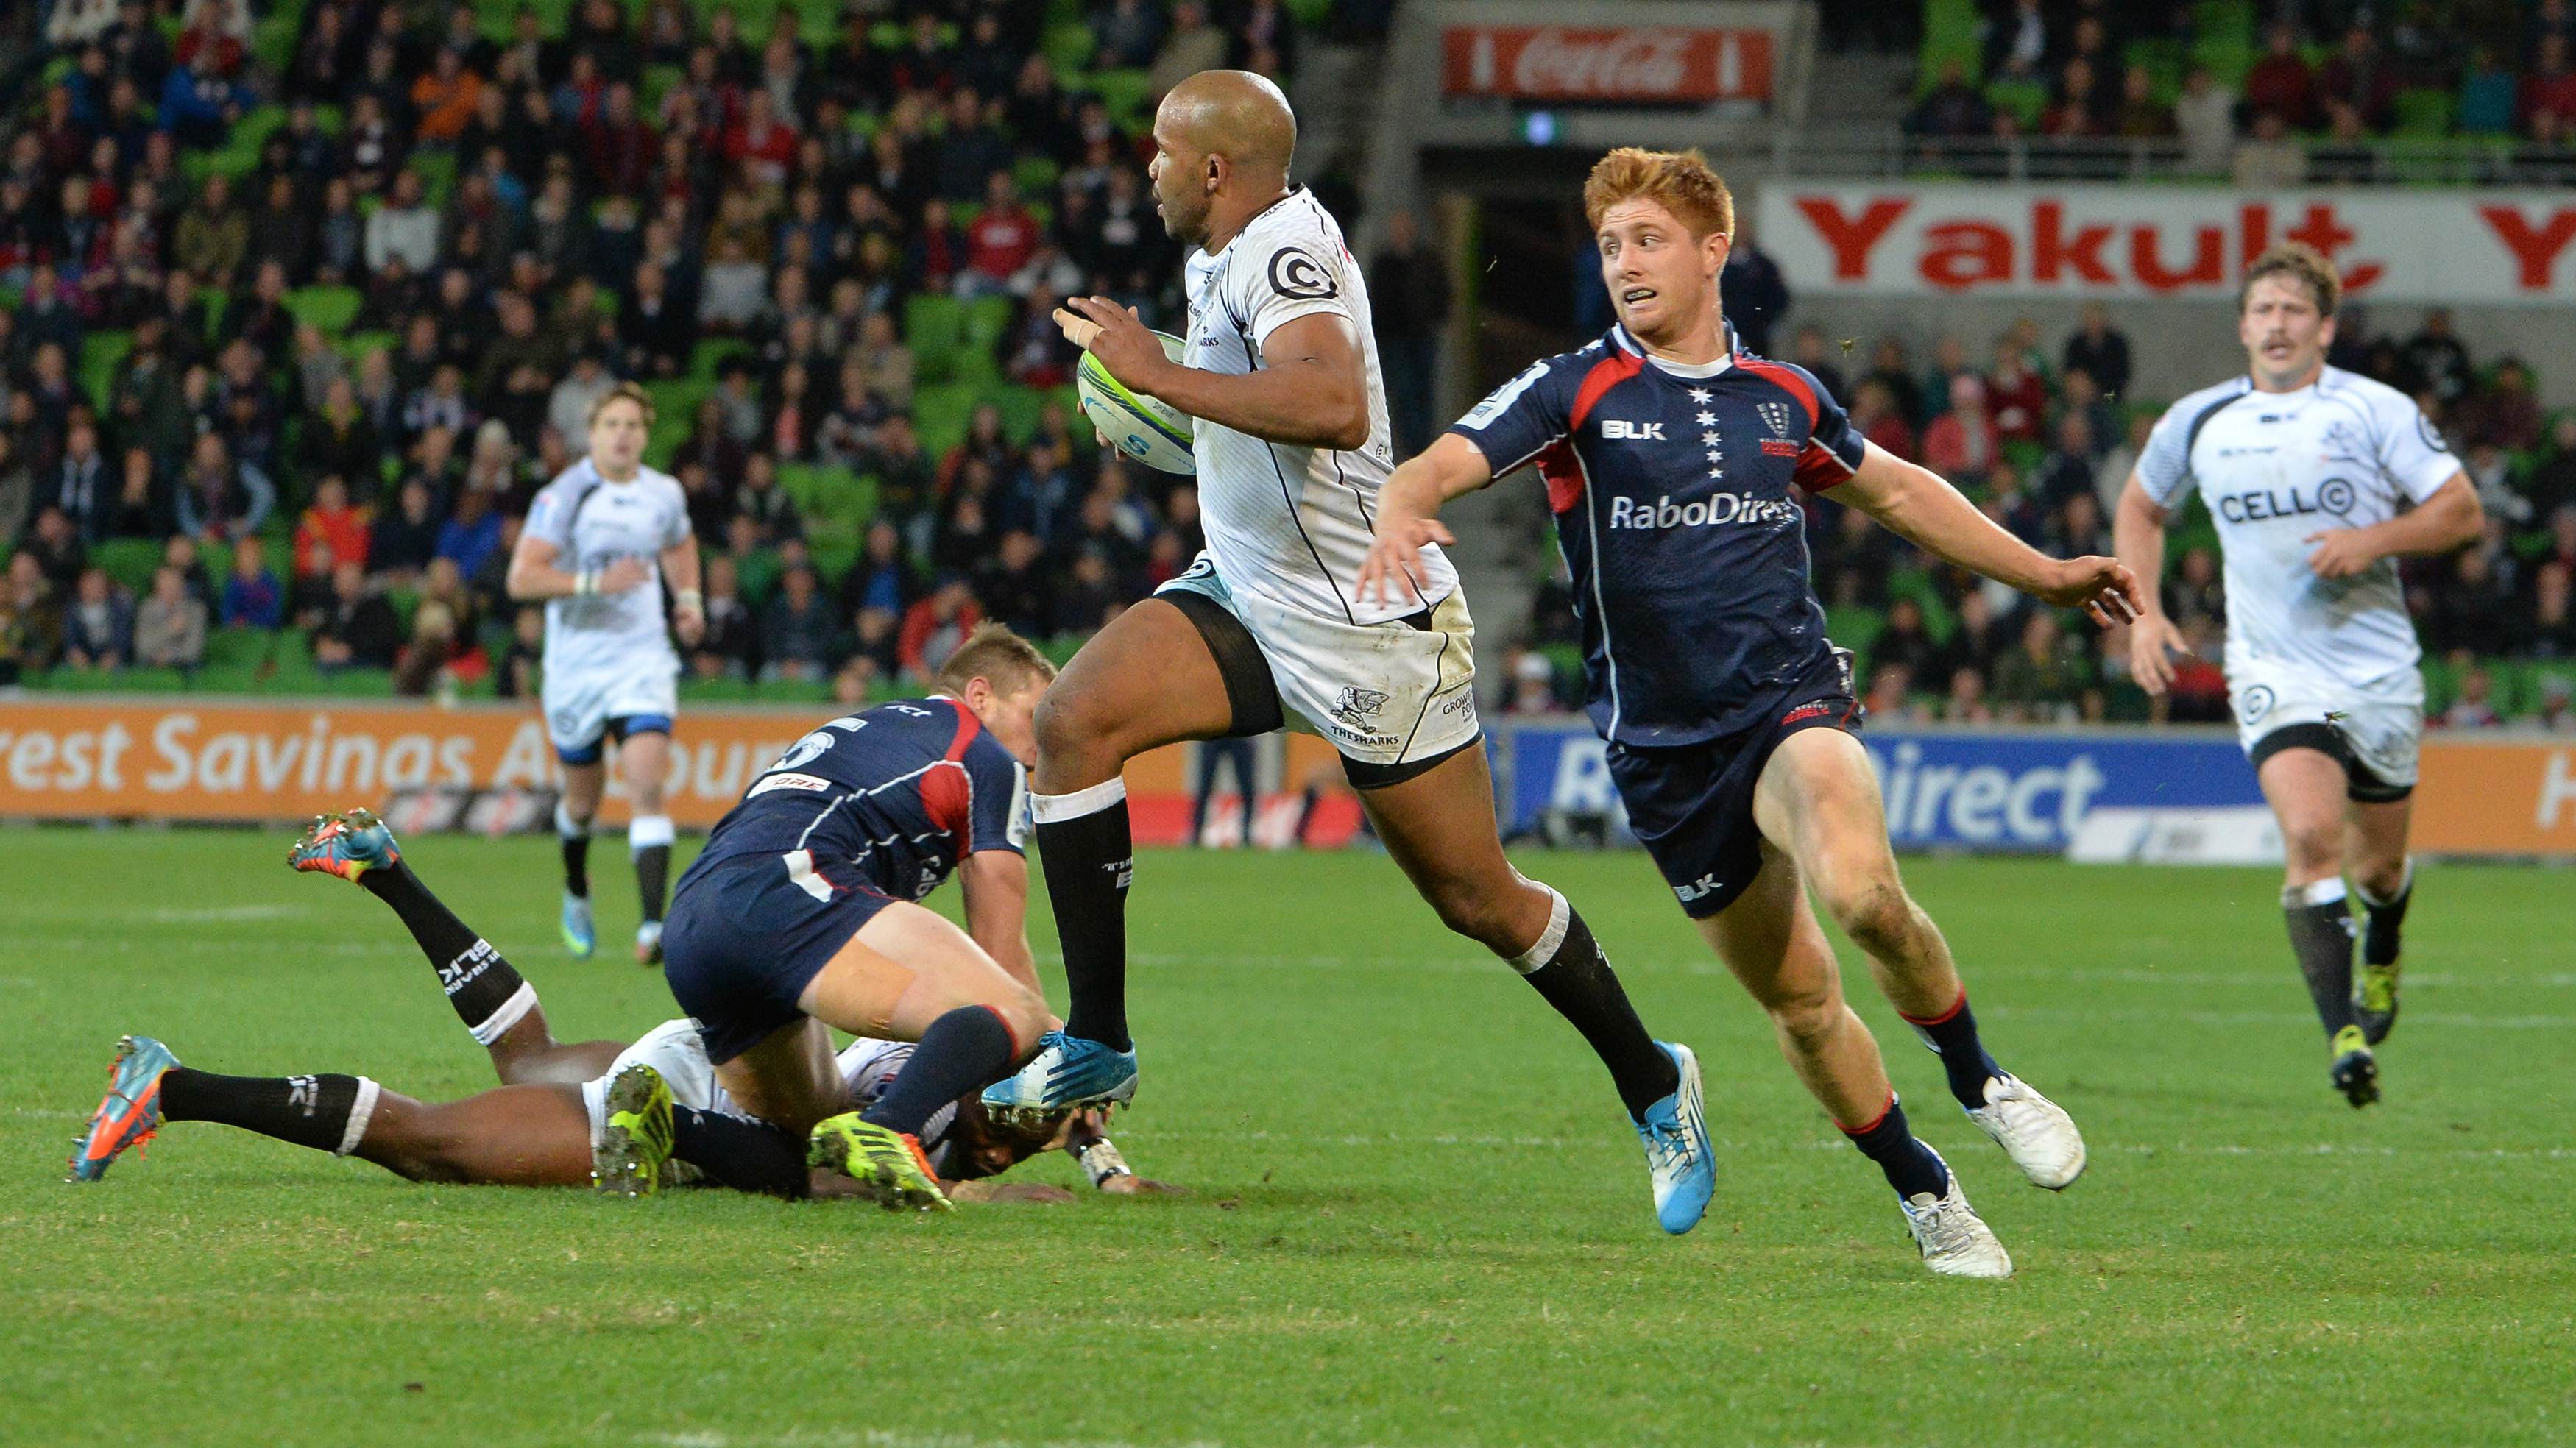 Sharks winger JP Pietersen makes a break for the try line in their match against the Rebels in Melbourne. Photo: AFP